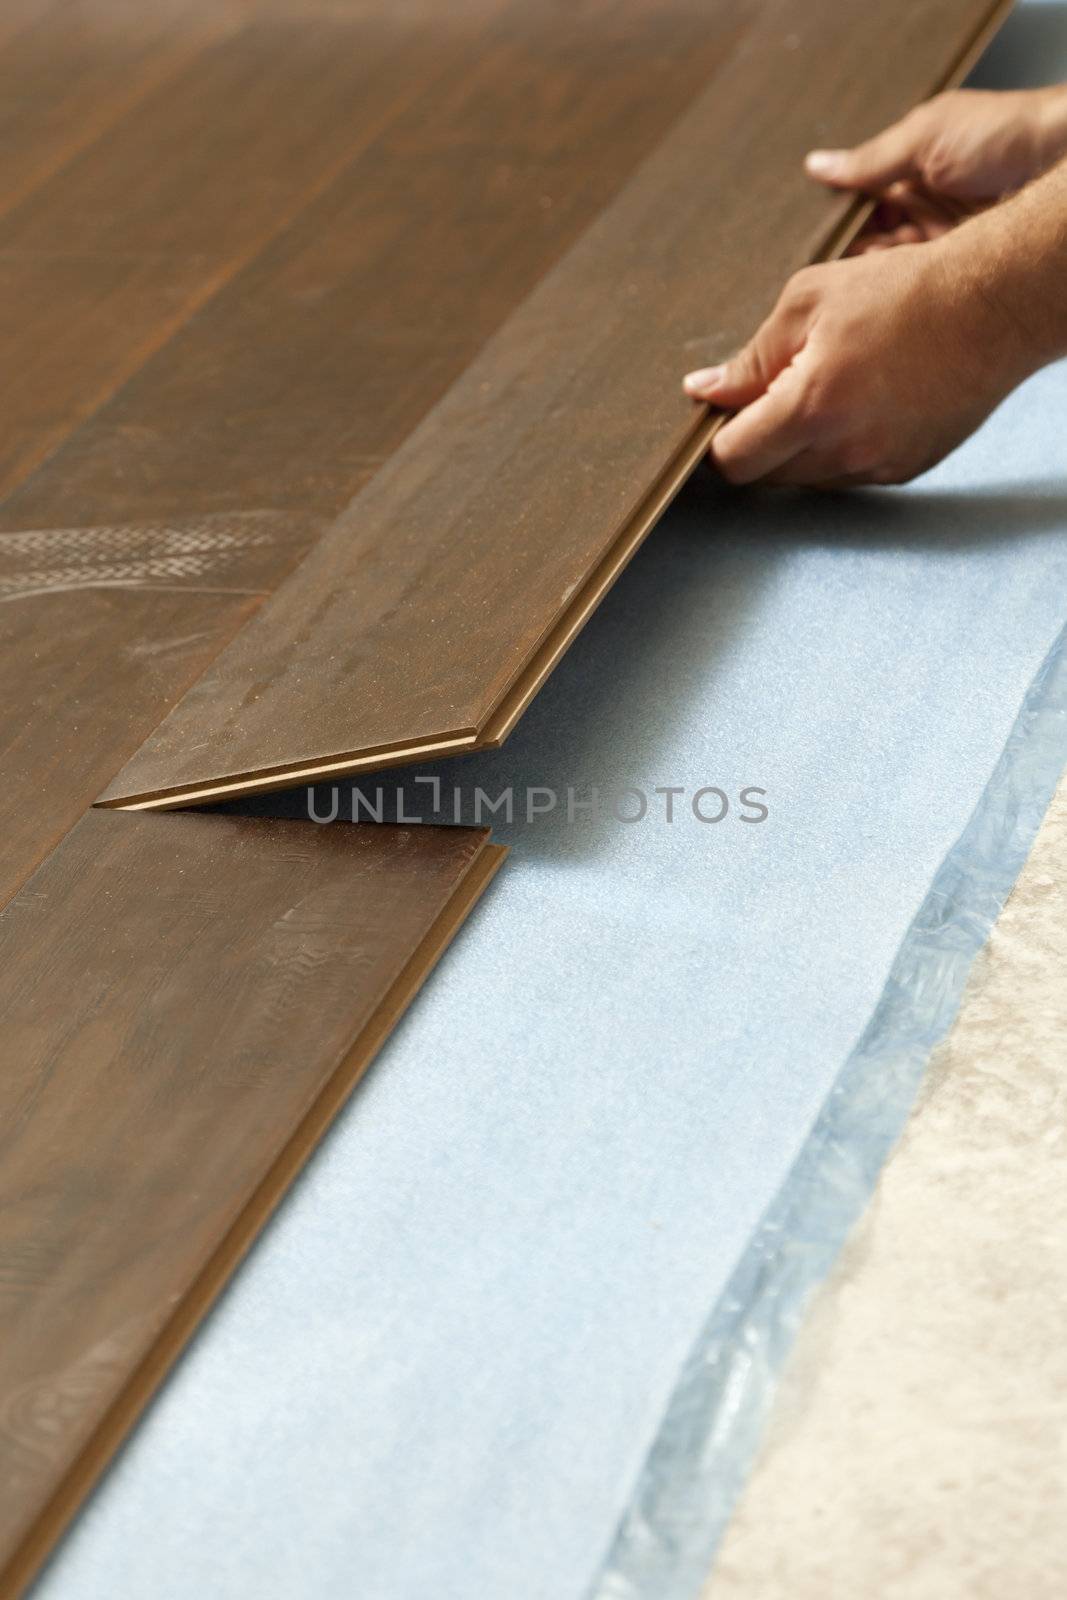 Man Installing New Laminate Wood Flooring by Feverpitched